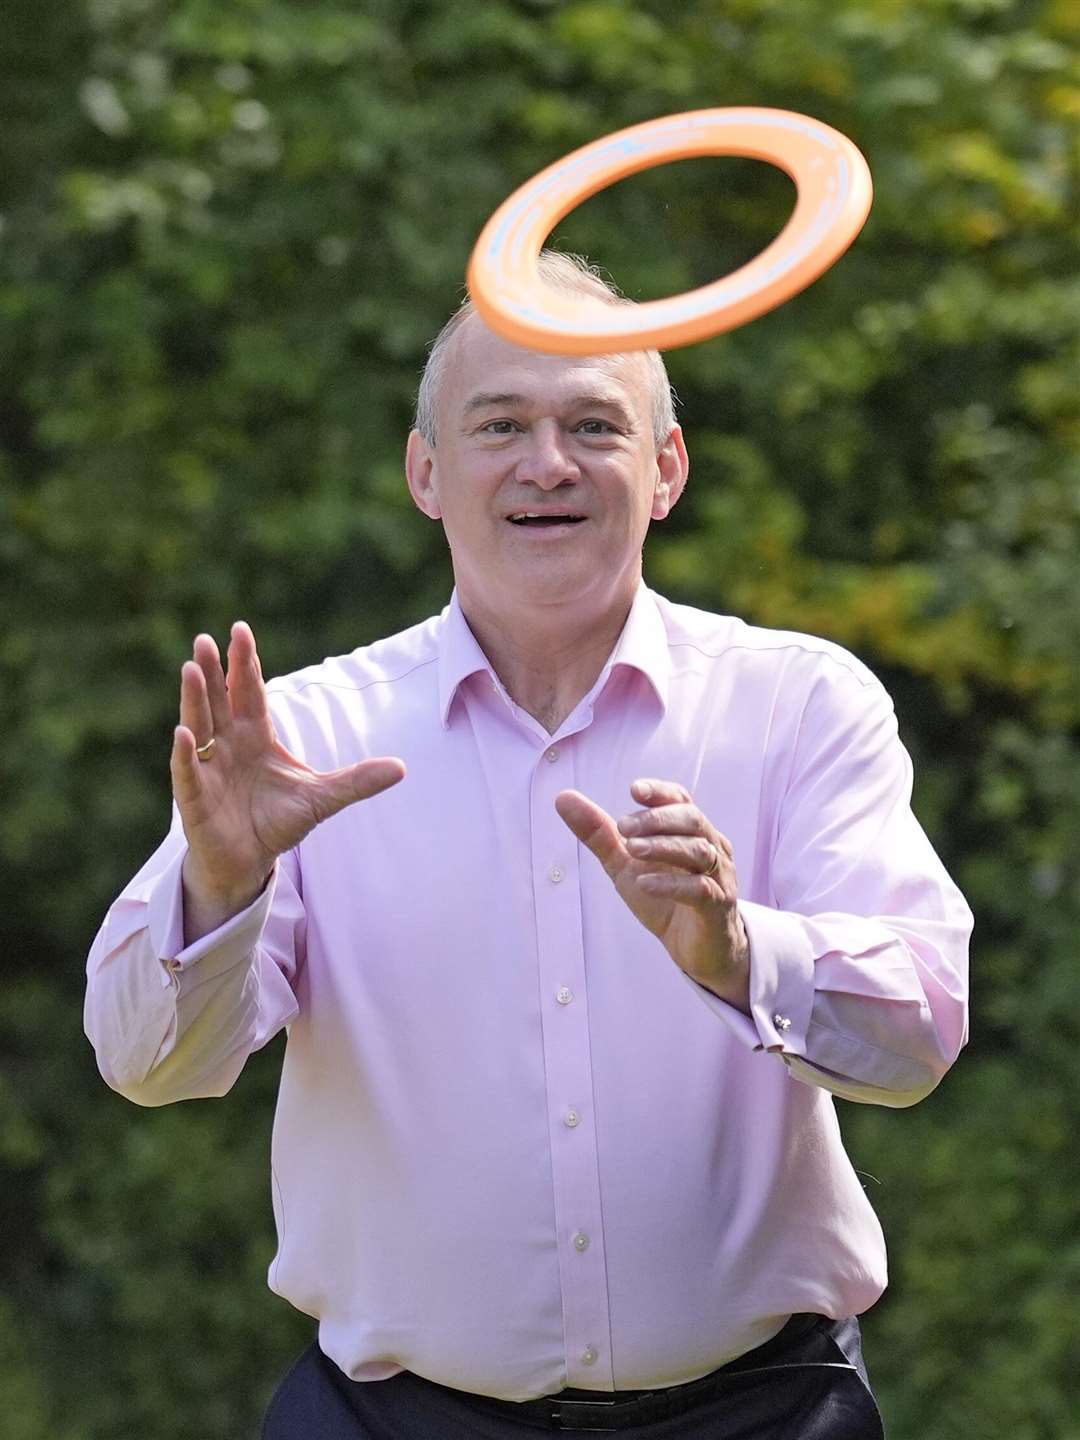 Lib Dem leader Sir Ed Davey plays with a frisbee during a visit to Crowd Hill Farm, in Hampshire (Andrew Matthews/PA)